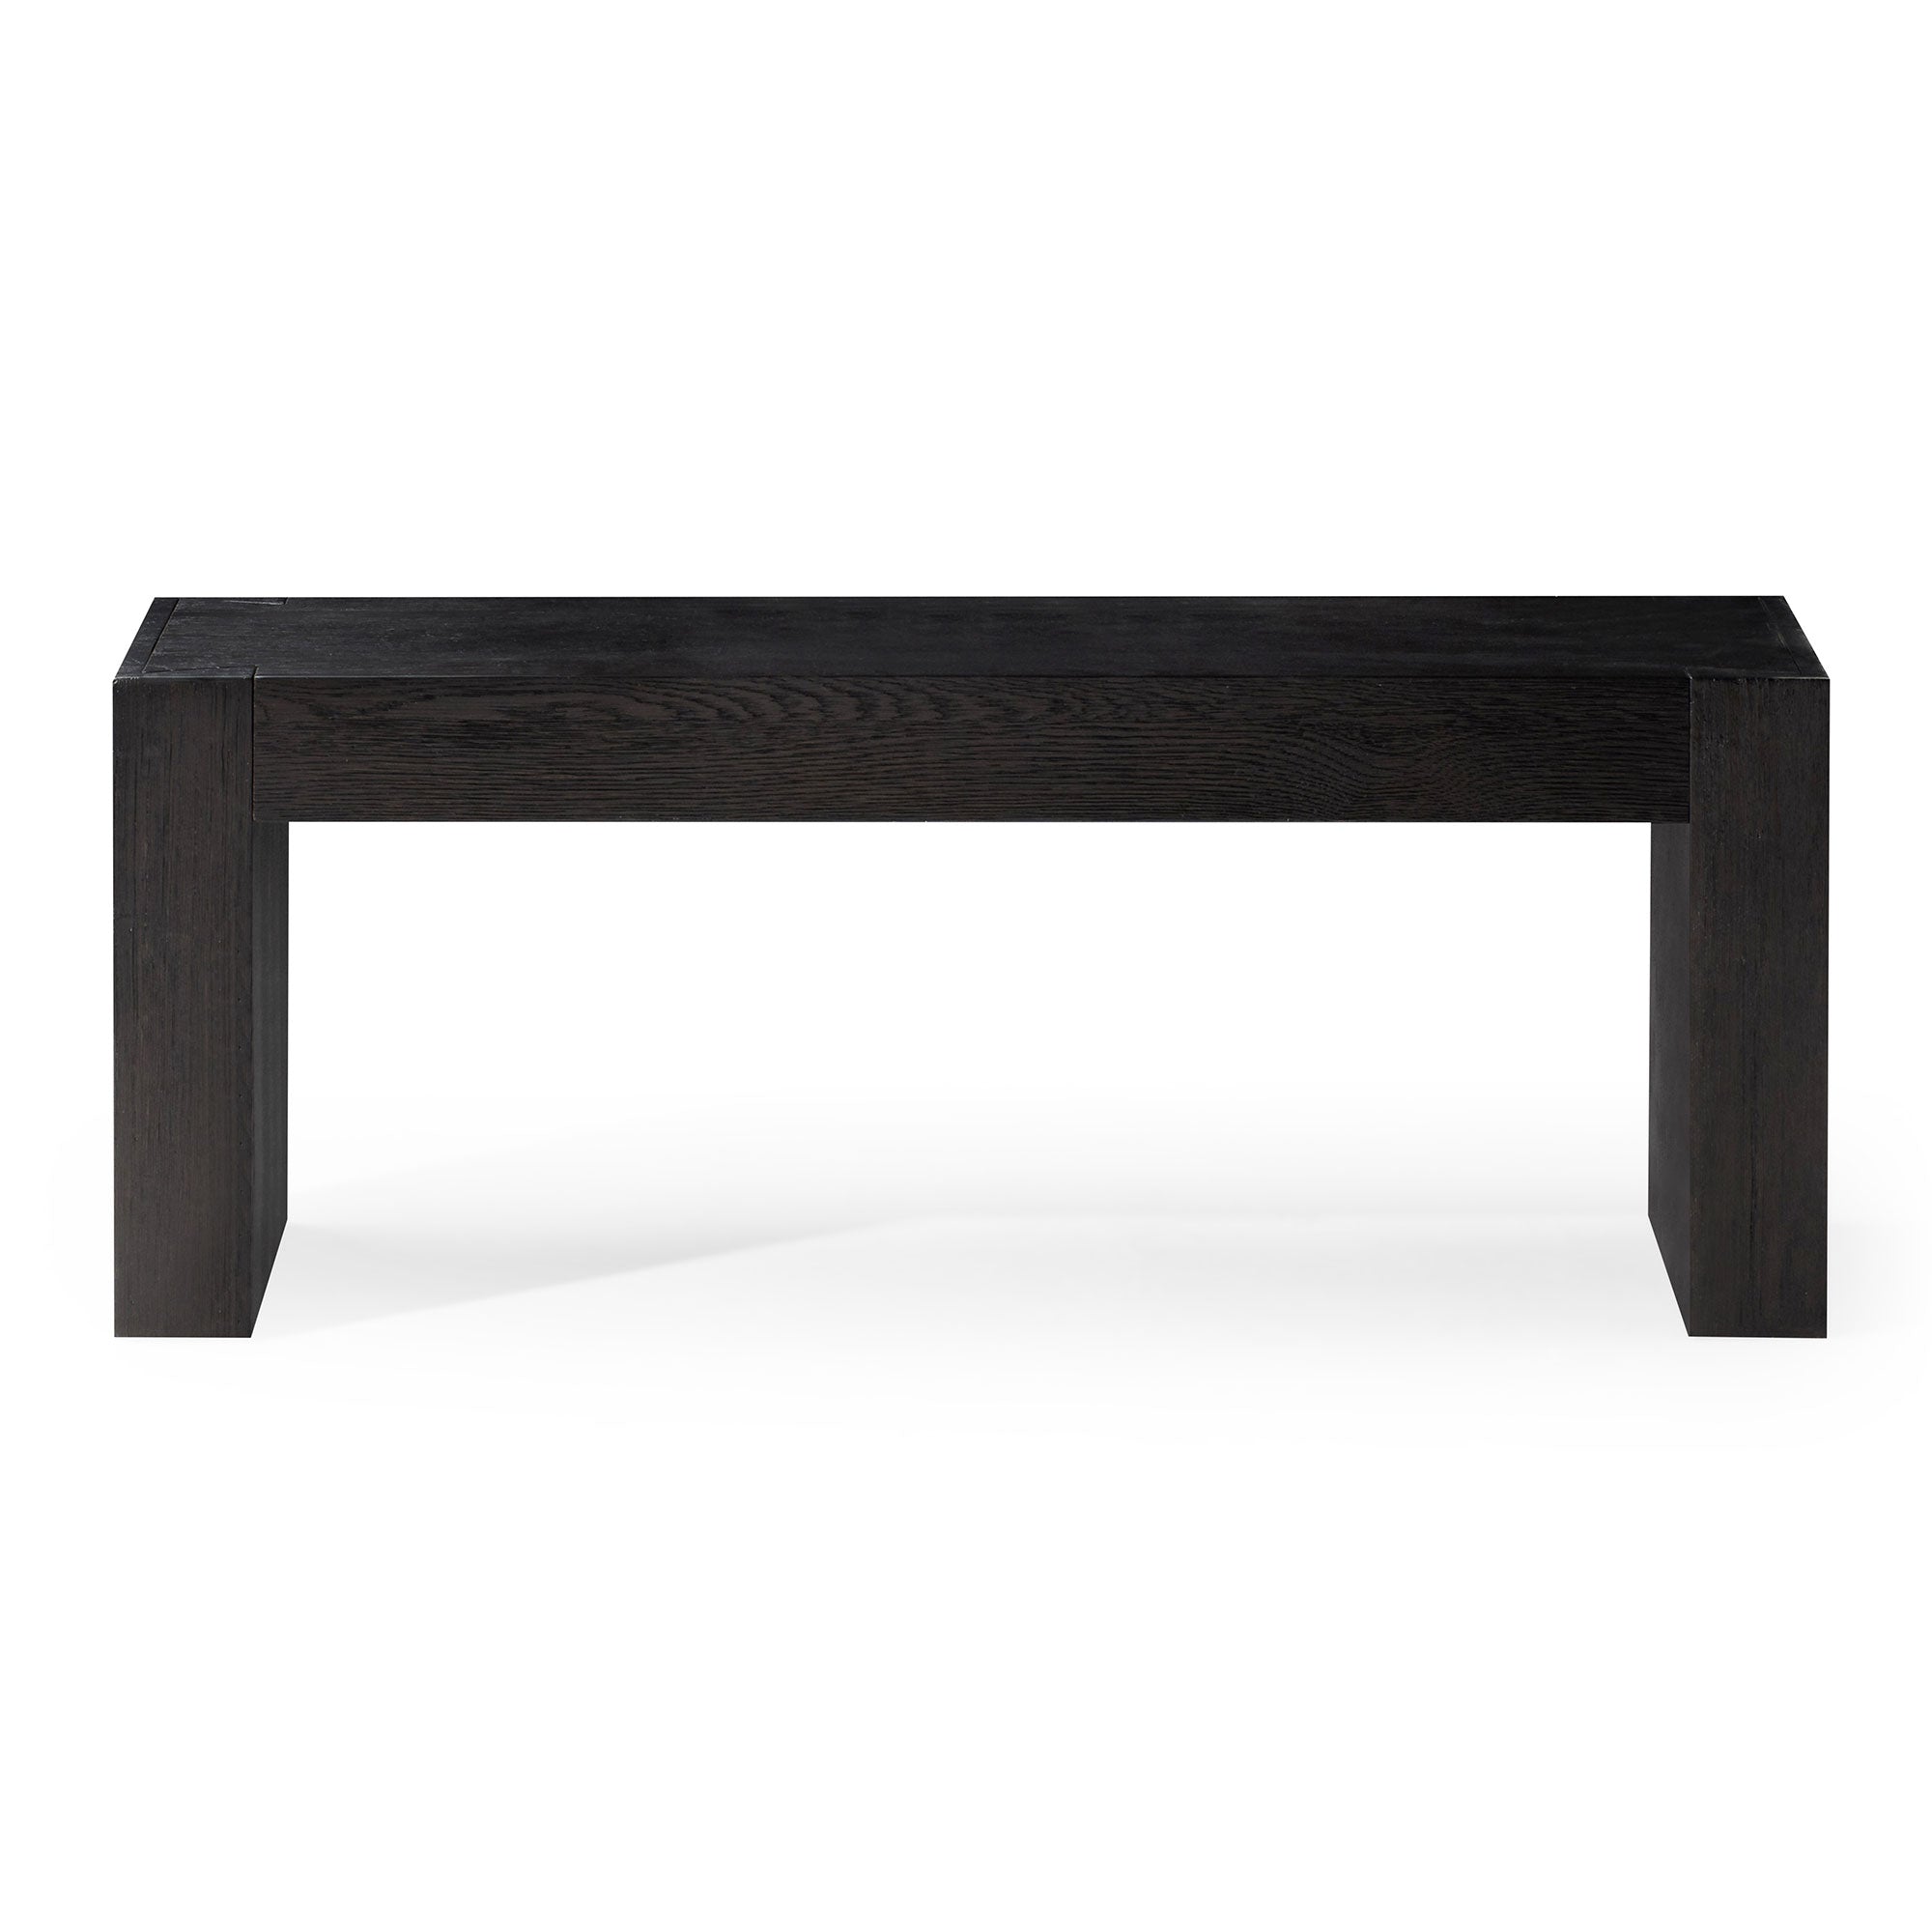 Zeno Contemporary Wooden Bench in Weathered Black Finish